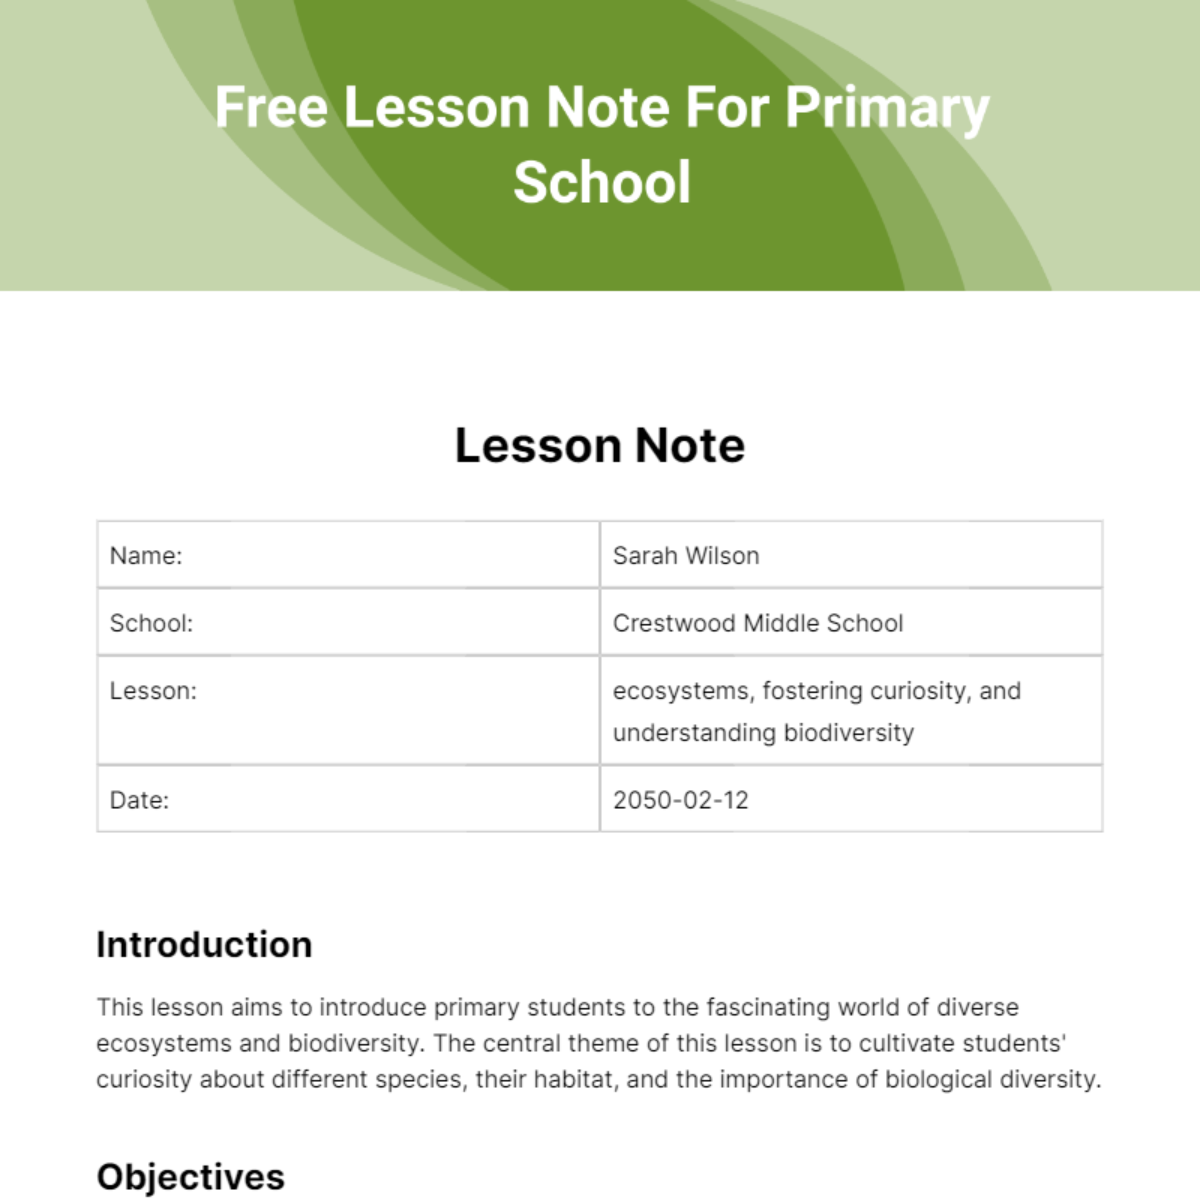 Free Lesson Note For Primary School Template